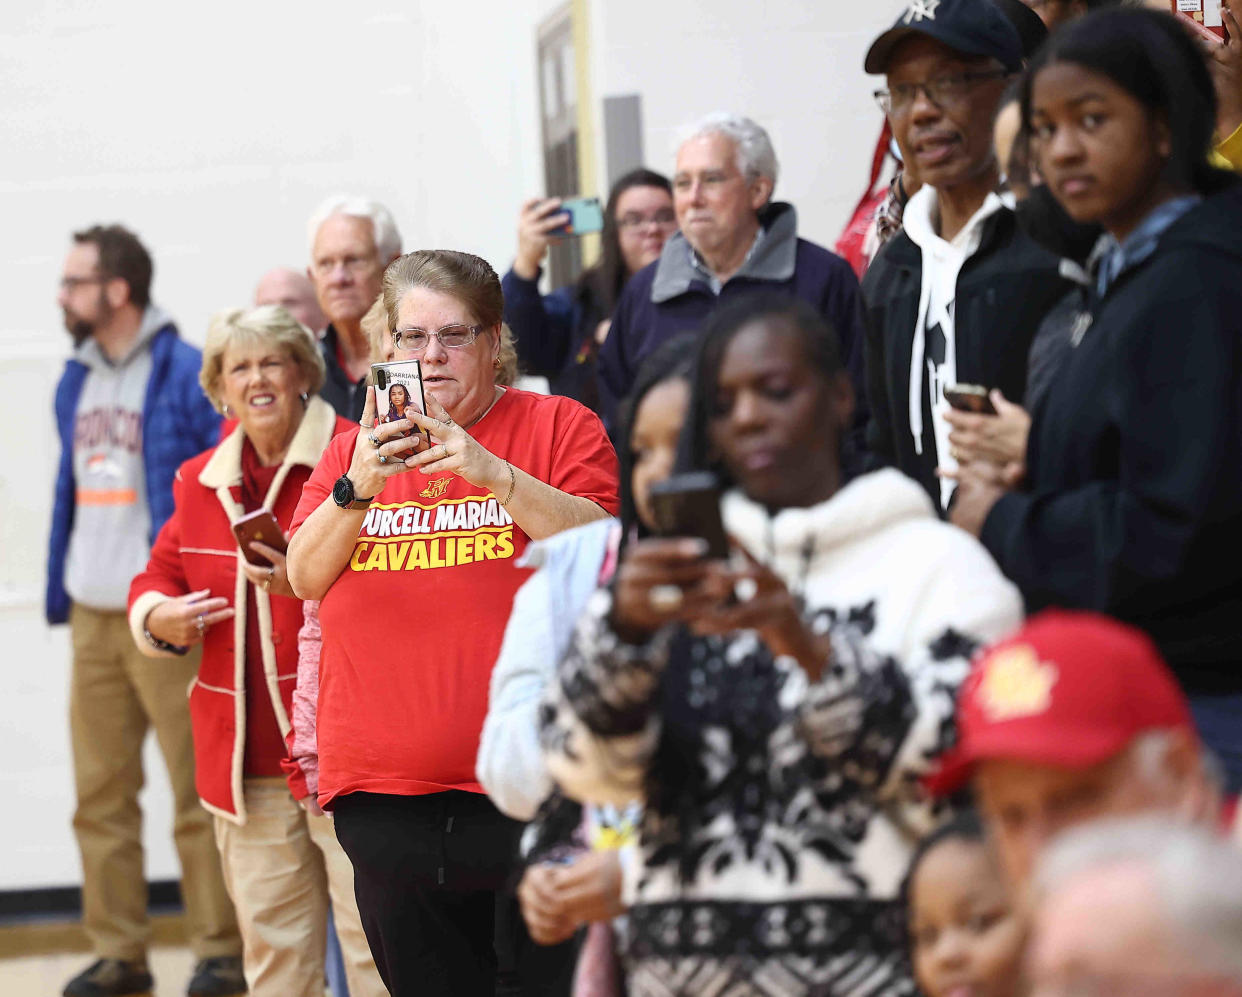 Maskless Purcell Marian fans cheer on the girls' basketball team on Sunday, March 13, 2022.